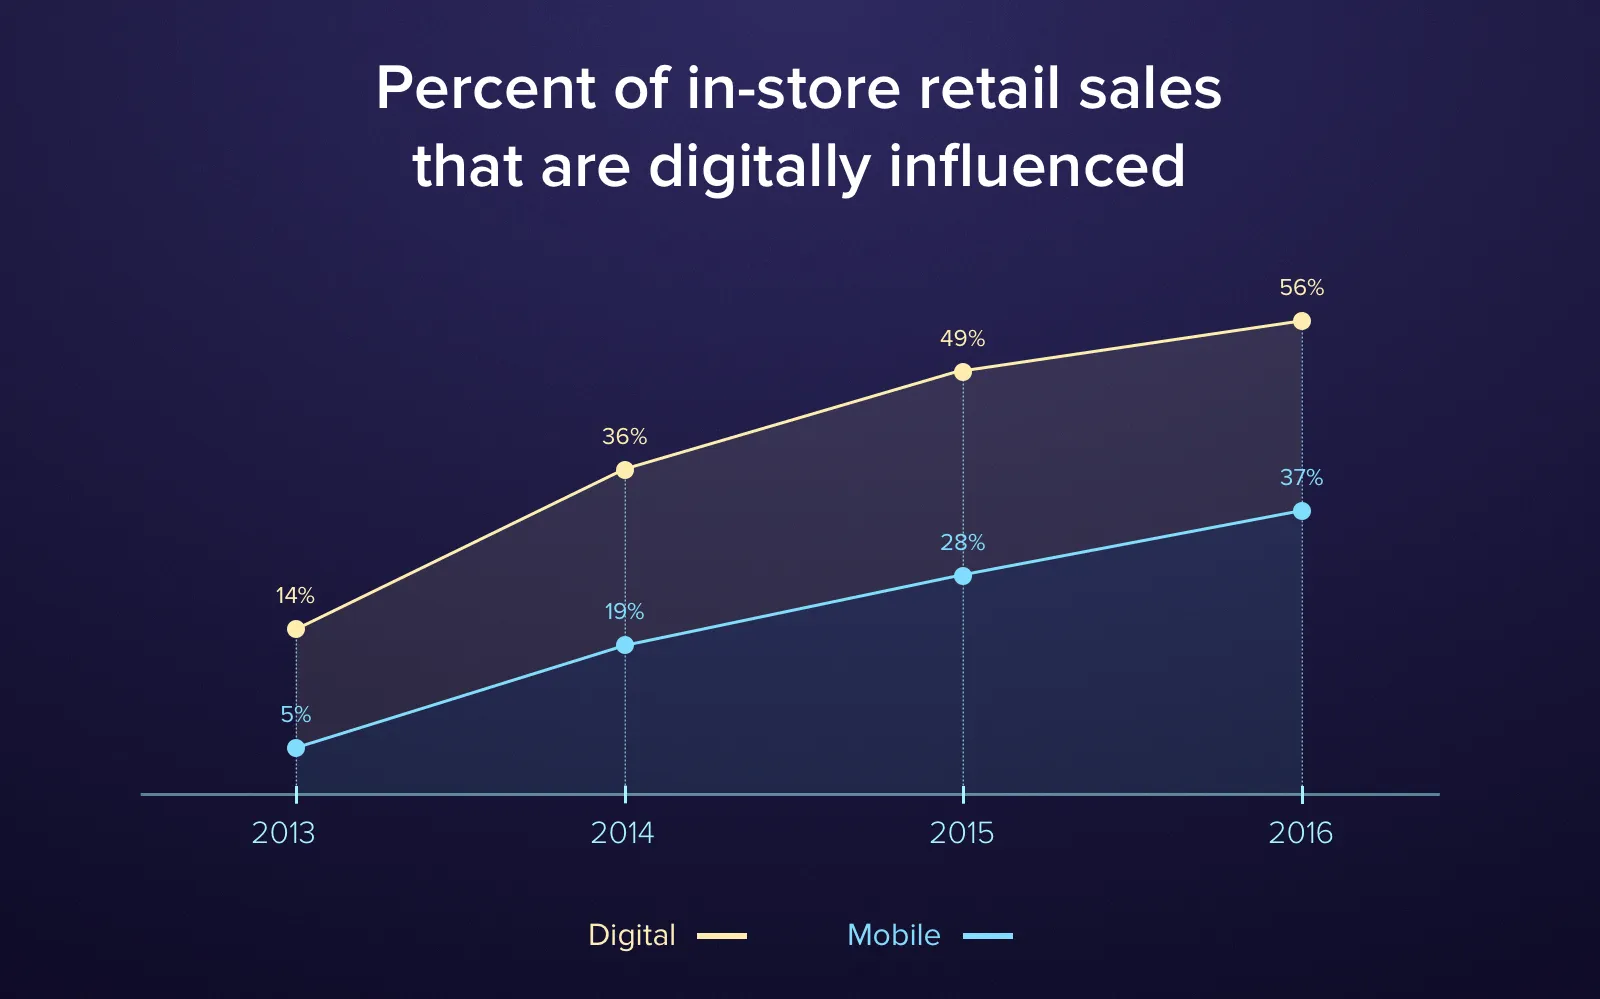 Percent of in-store retail sales that are digitally influenced